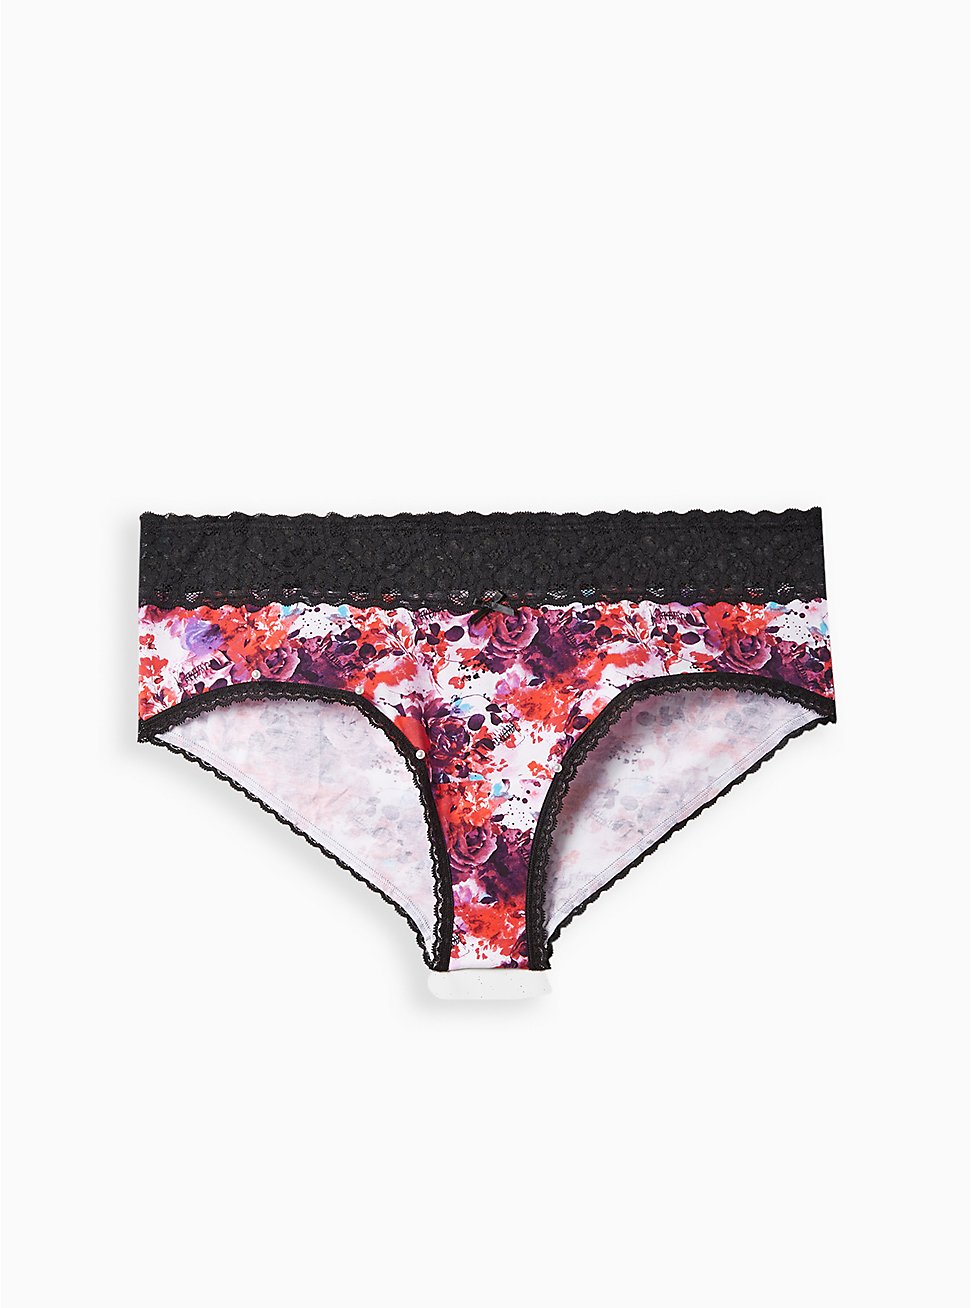 Plus Size Wide Lace Cheeky Panty - Cotton Floral Purple, WATER COLOR SKULL, hi-res